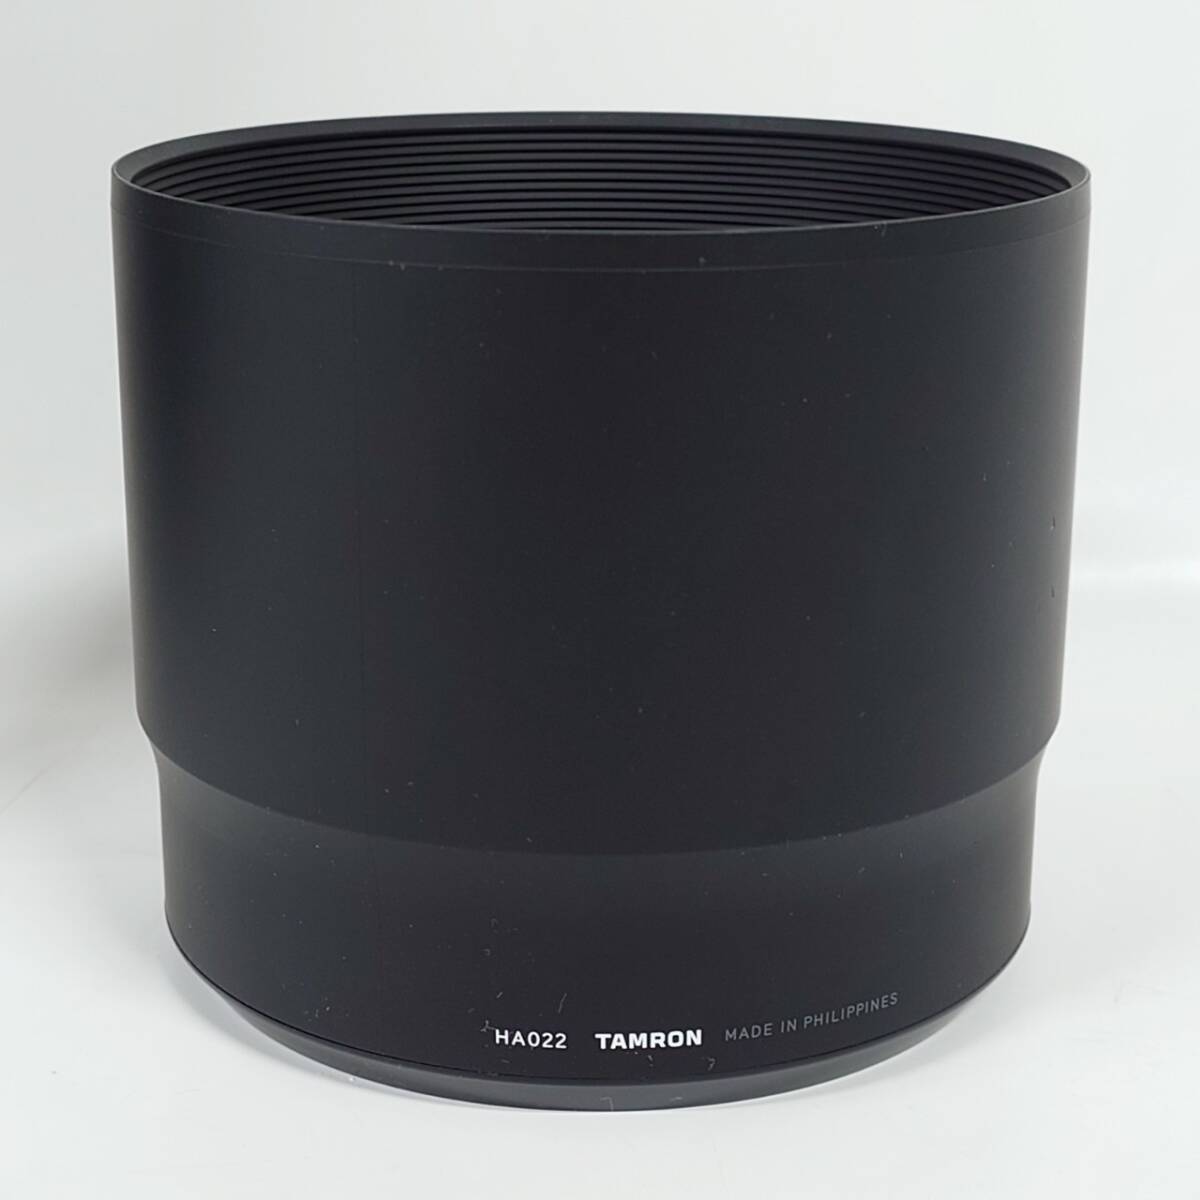 1 jpy ~[ dampproof box storage ] Tamron TAMRON SP 150-600mm F/5-6.3 Di VC USD G2 single-lens camera for telephoto lens HA022 lens with a hood .G131636